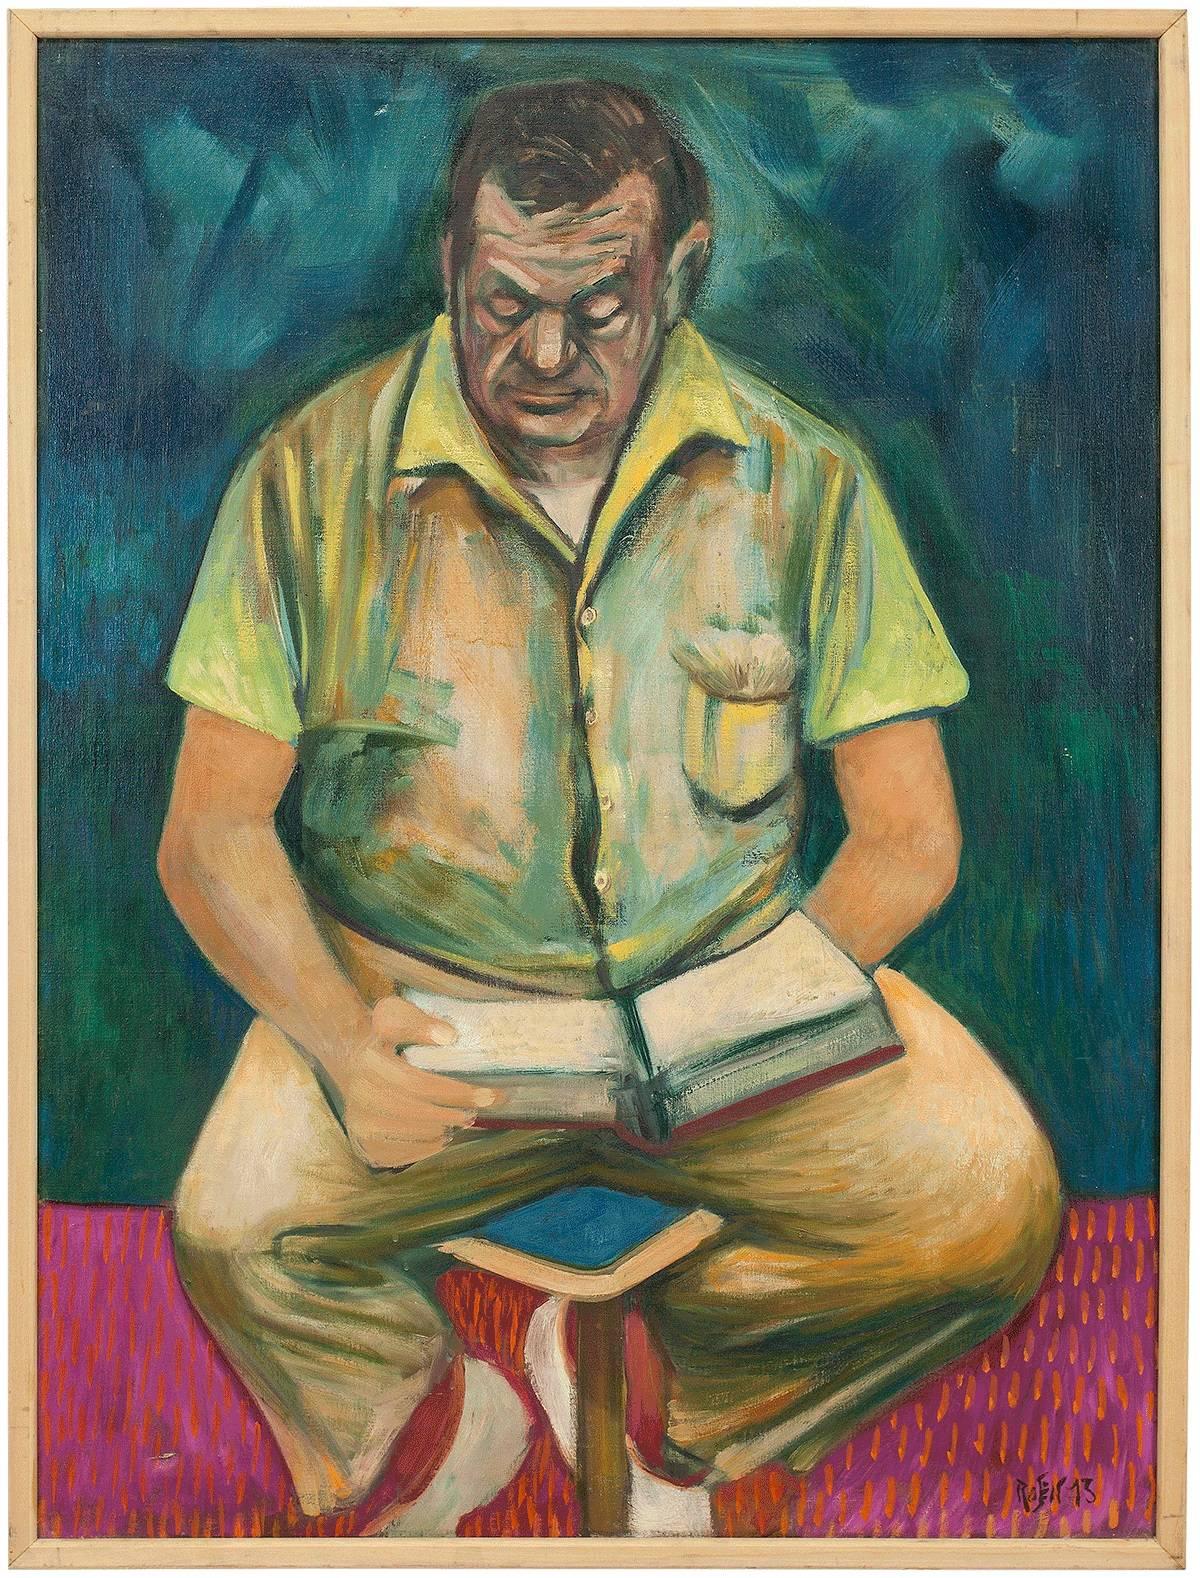 David Rosen (b.1912) Figurative Painting - Middle Age Aint That Bad. (Retiree Reading a Book)